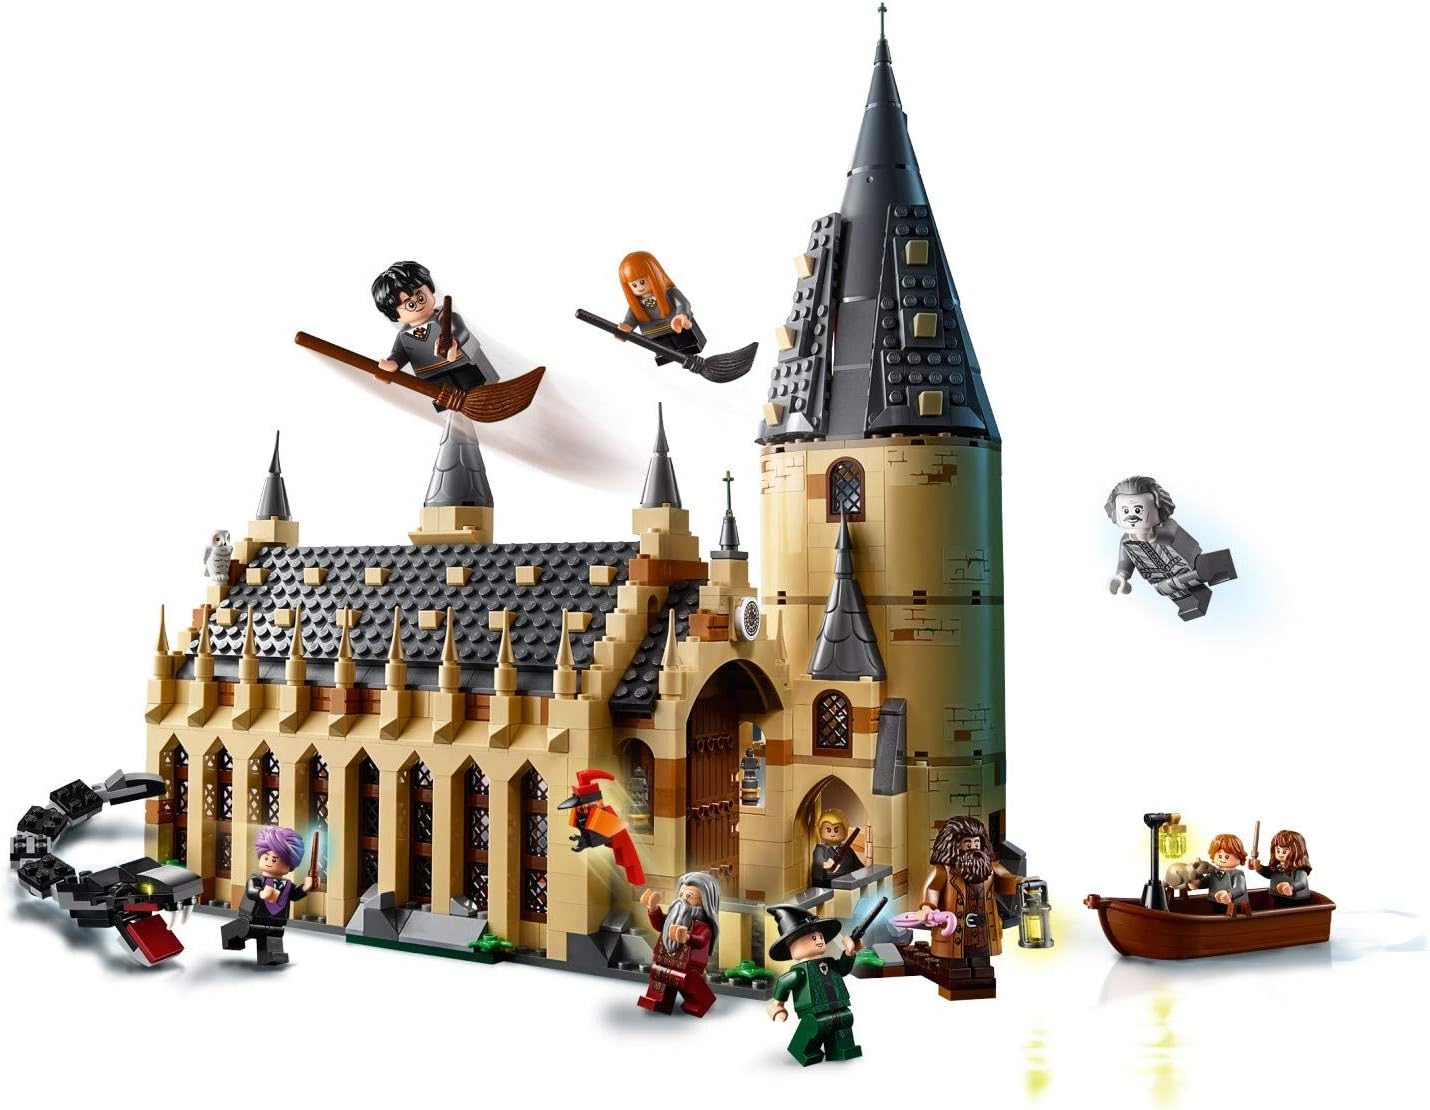 Lego 75954 Harry Potter Hogwarts Great Hall Toy, Wizzarding World Fan Gift, Building Sets for Kids